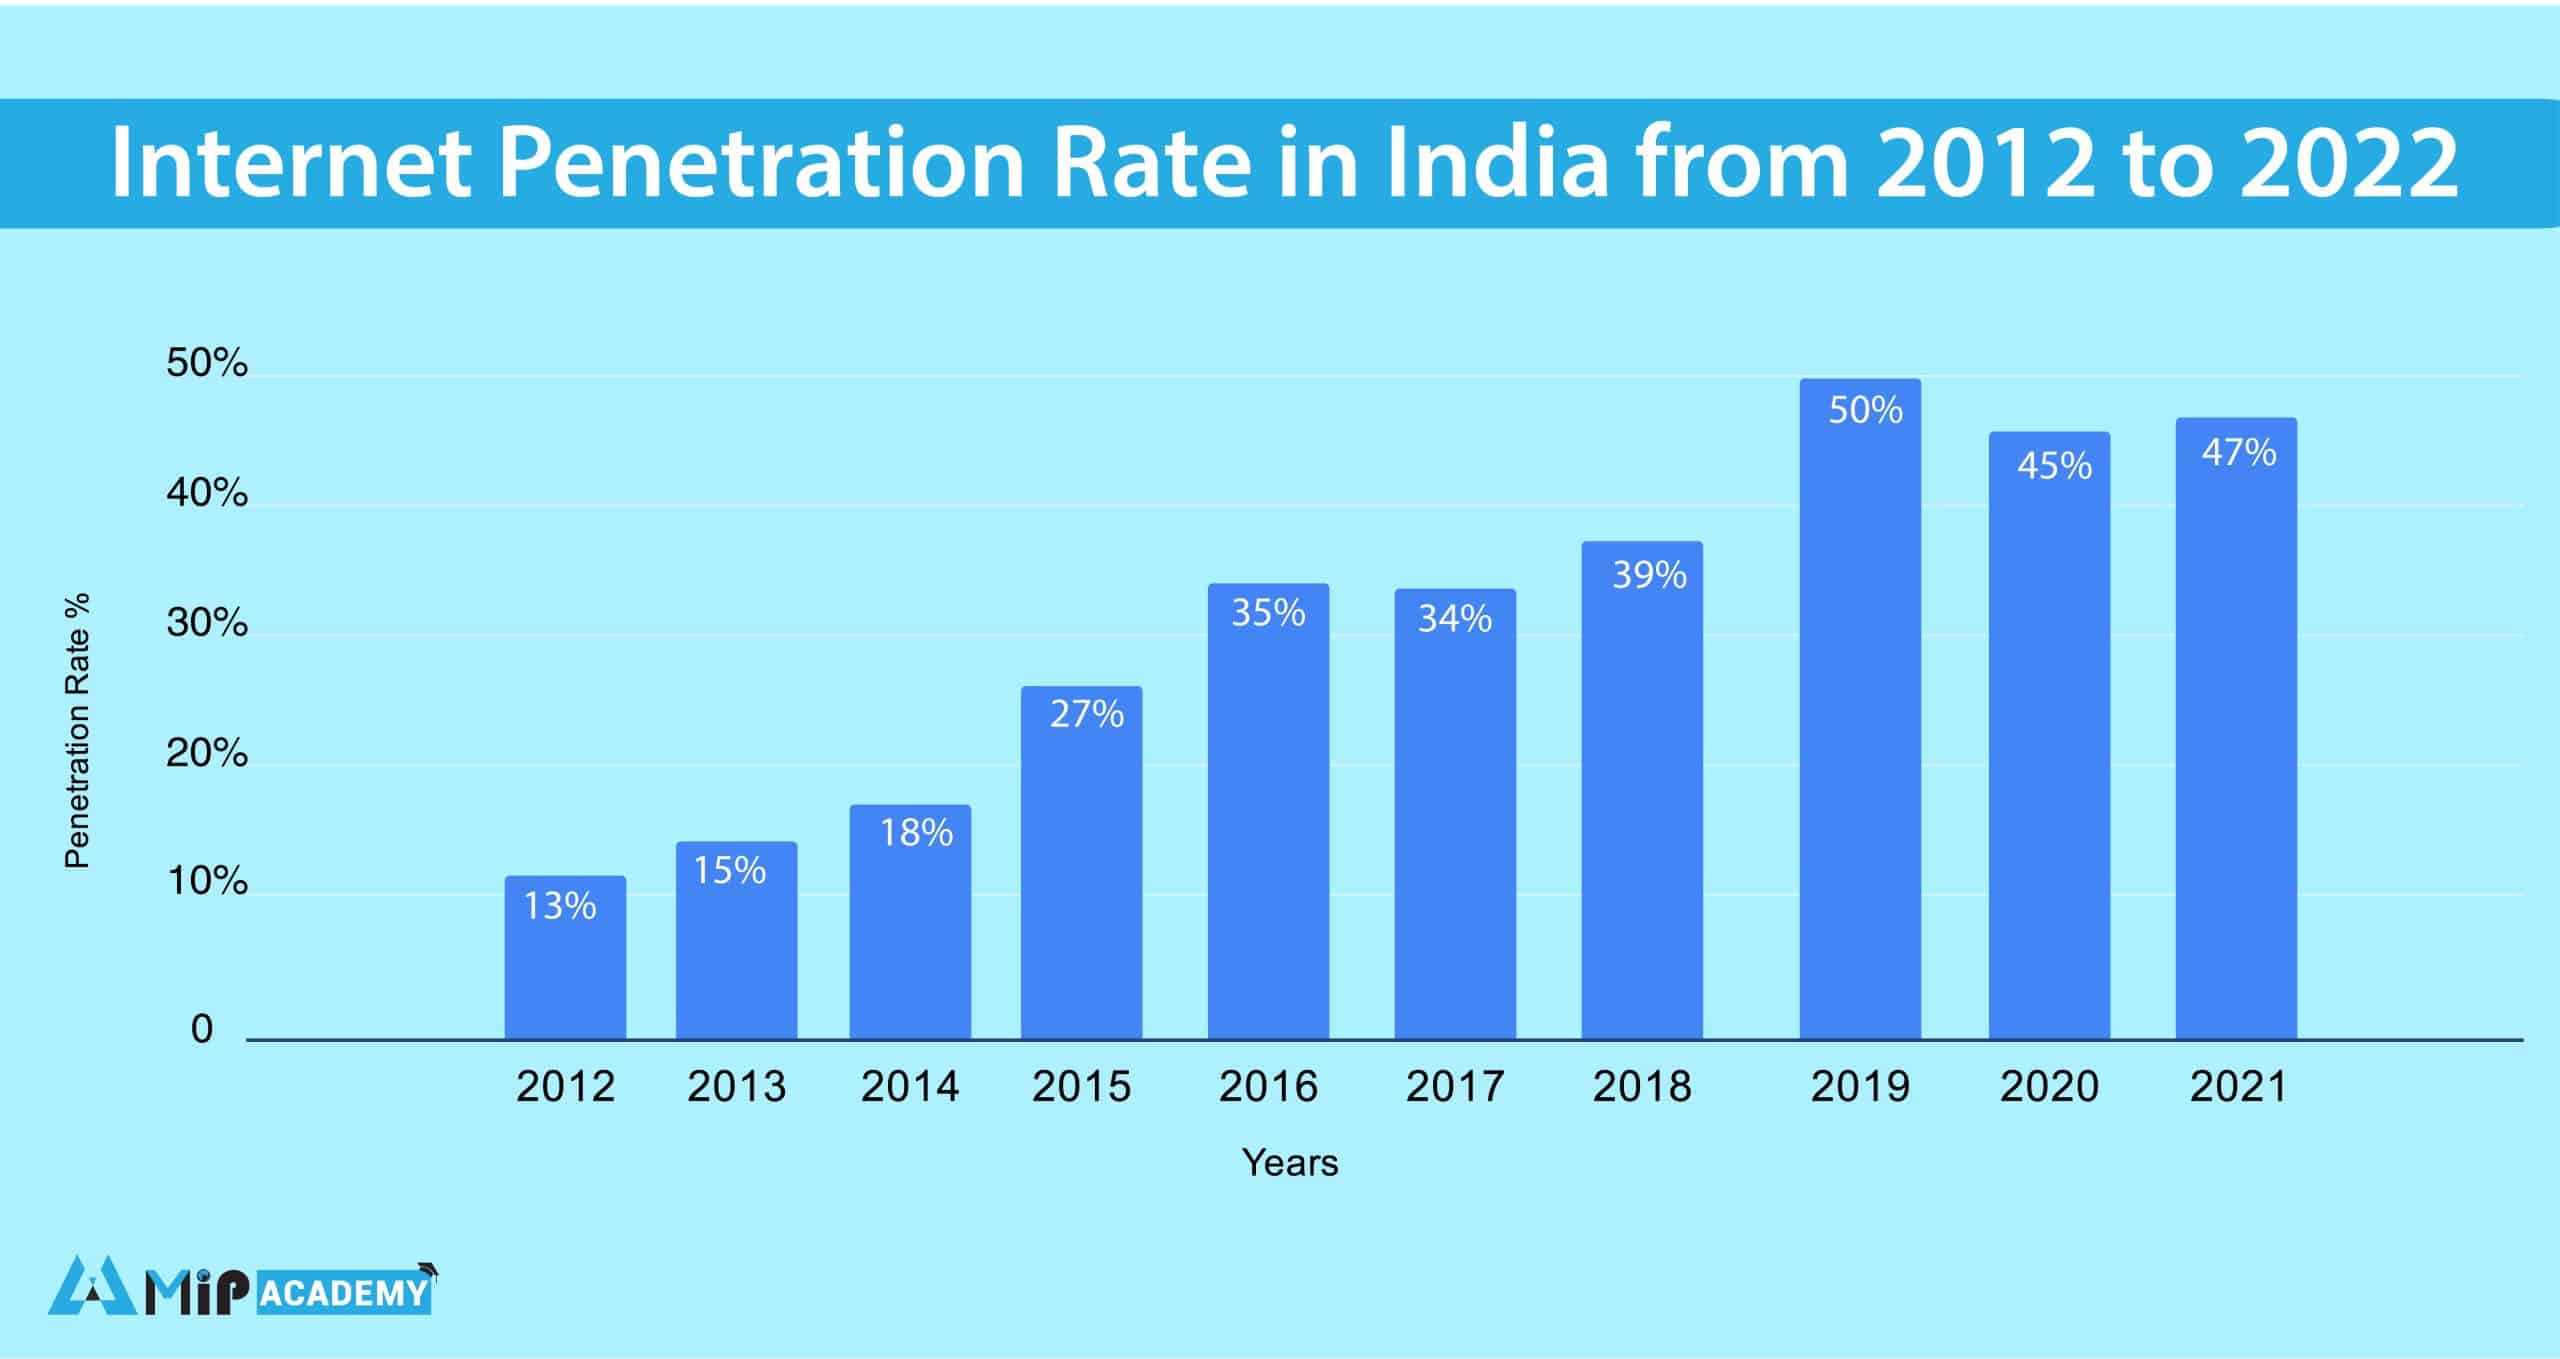 Internet Penetration Rate in India